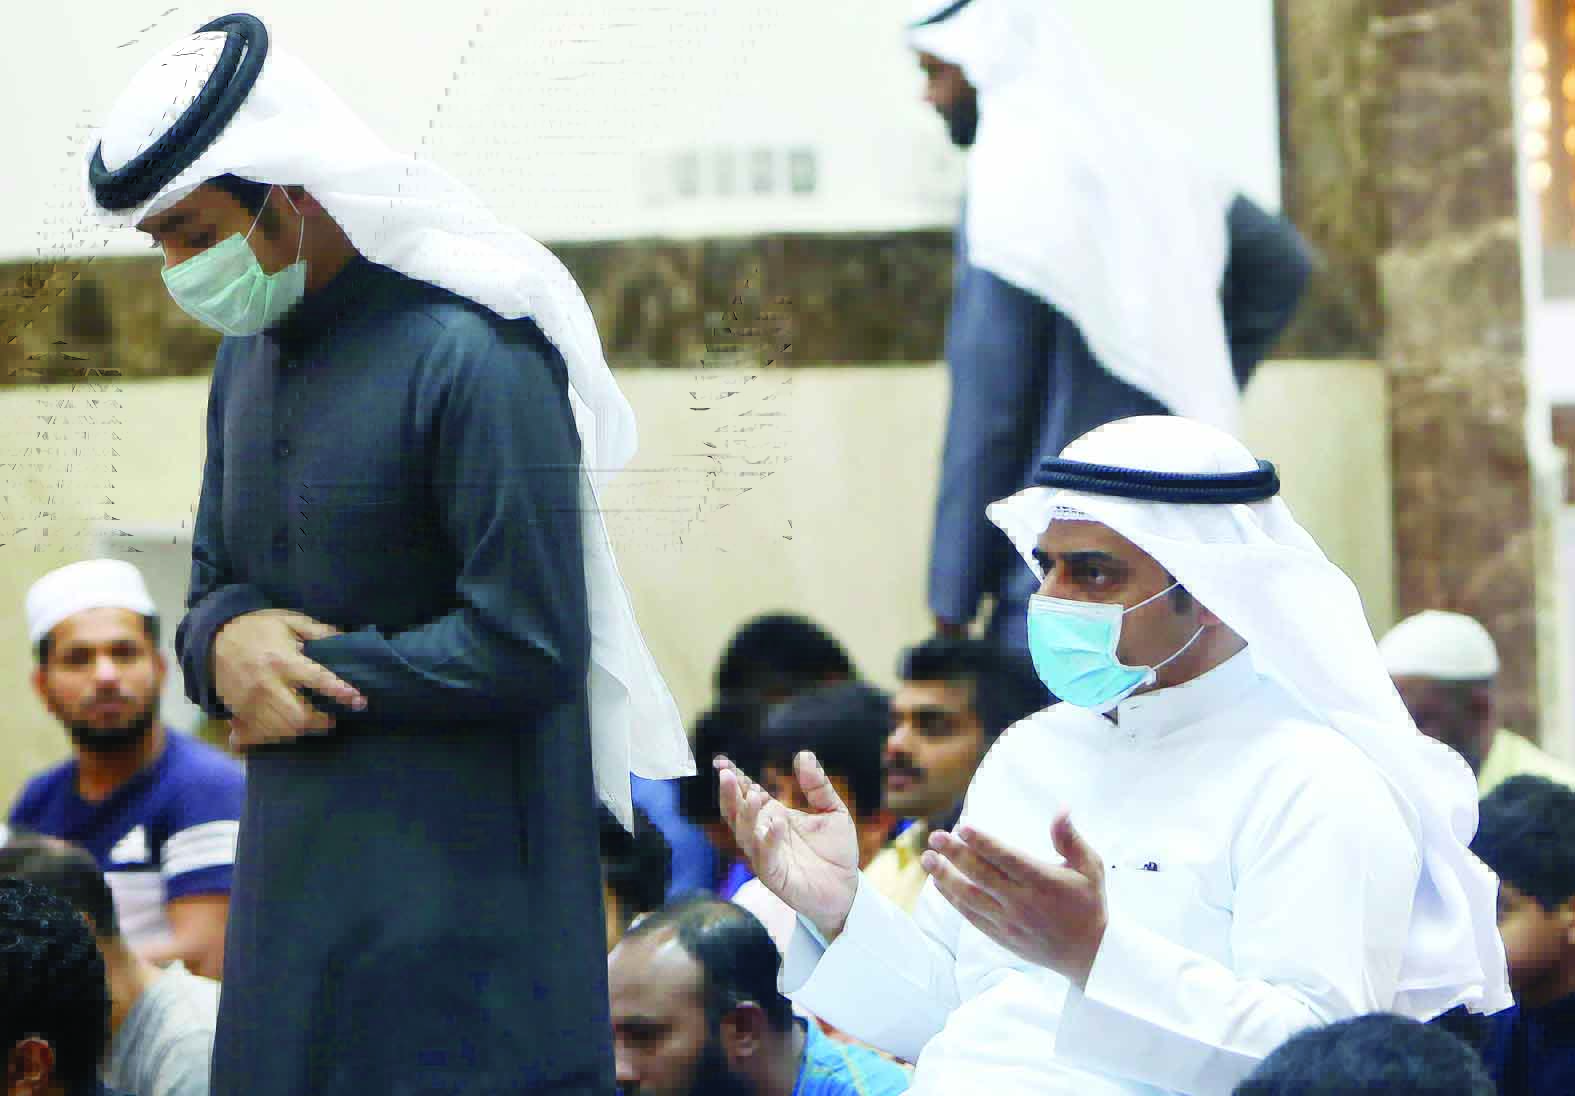 Muslim men wearing protective masks during Friday prayers in Kuwait City on February 28, 2020. Kuwait's Ministry of Awqaf and Islamic Affairs set the Friday prayer sermon to not exceed 10 minutes, and discuss precautions against coronavirus infection.